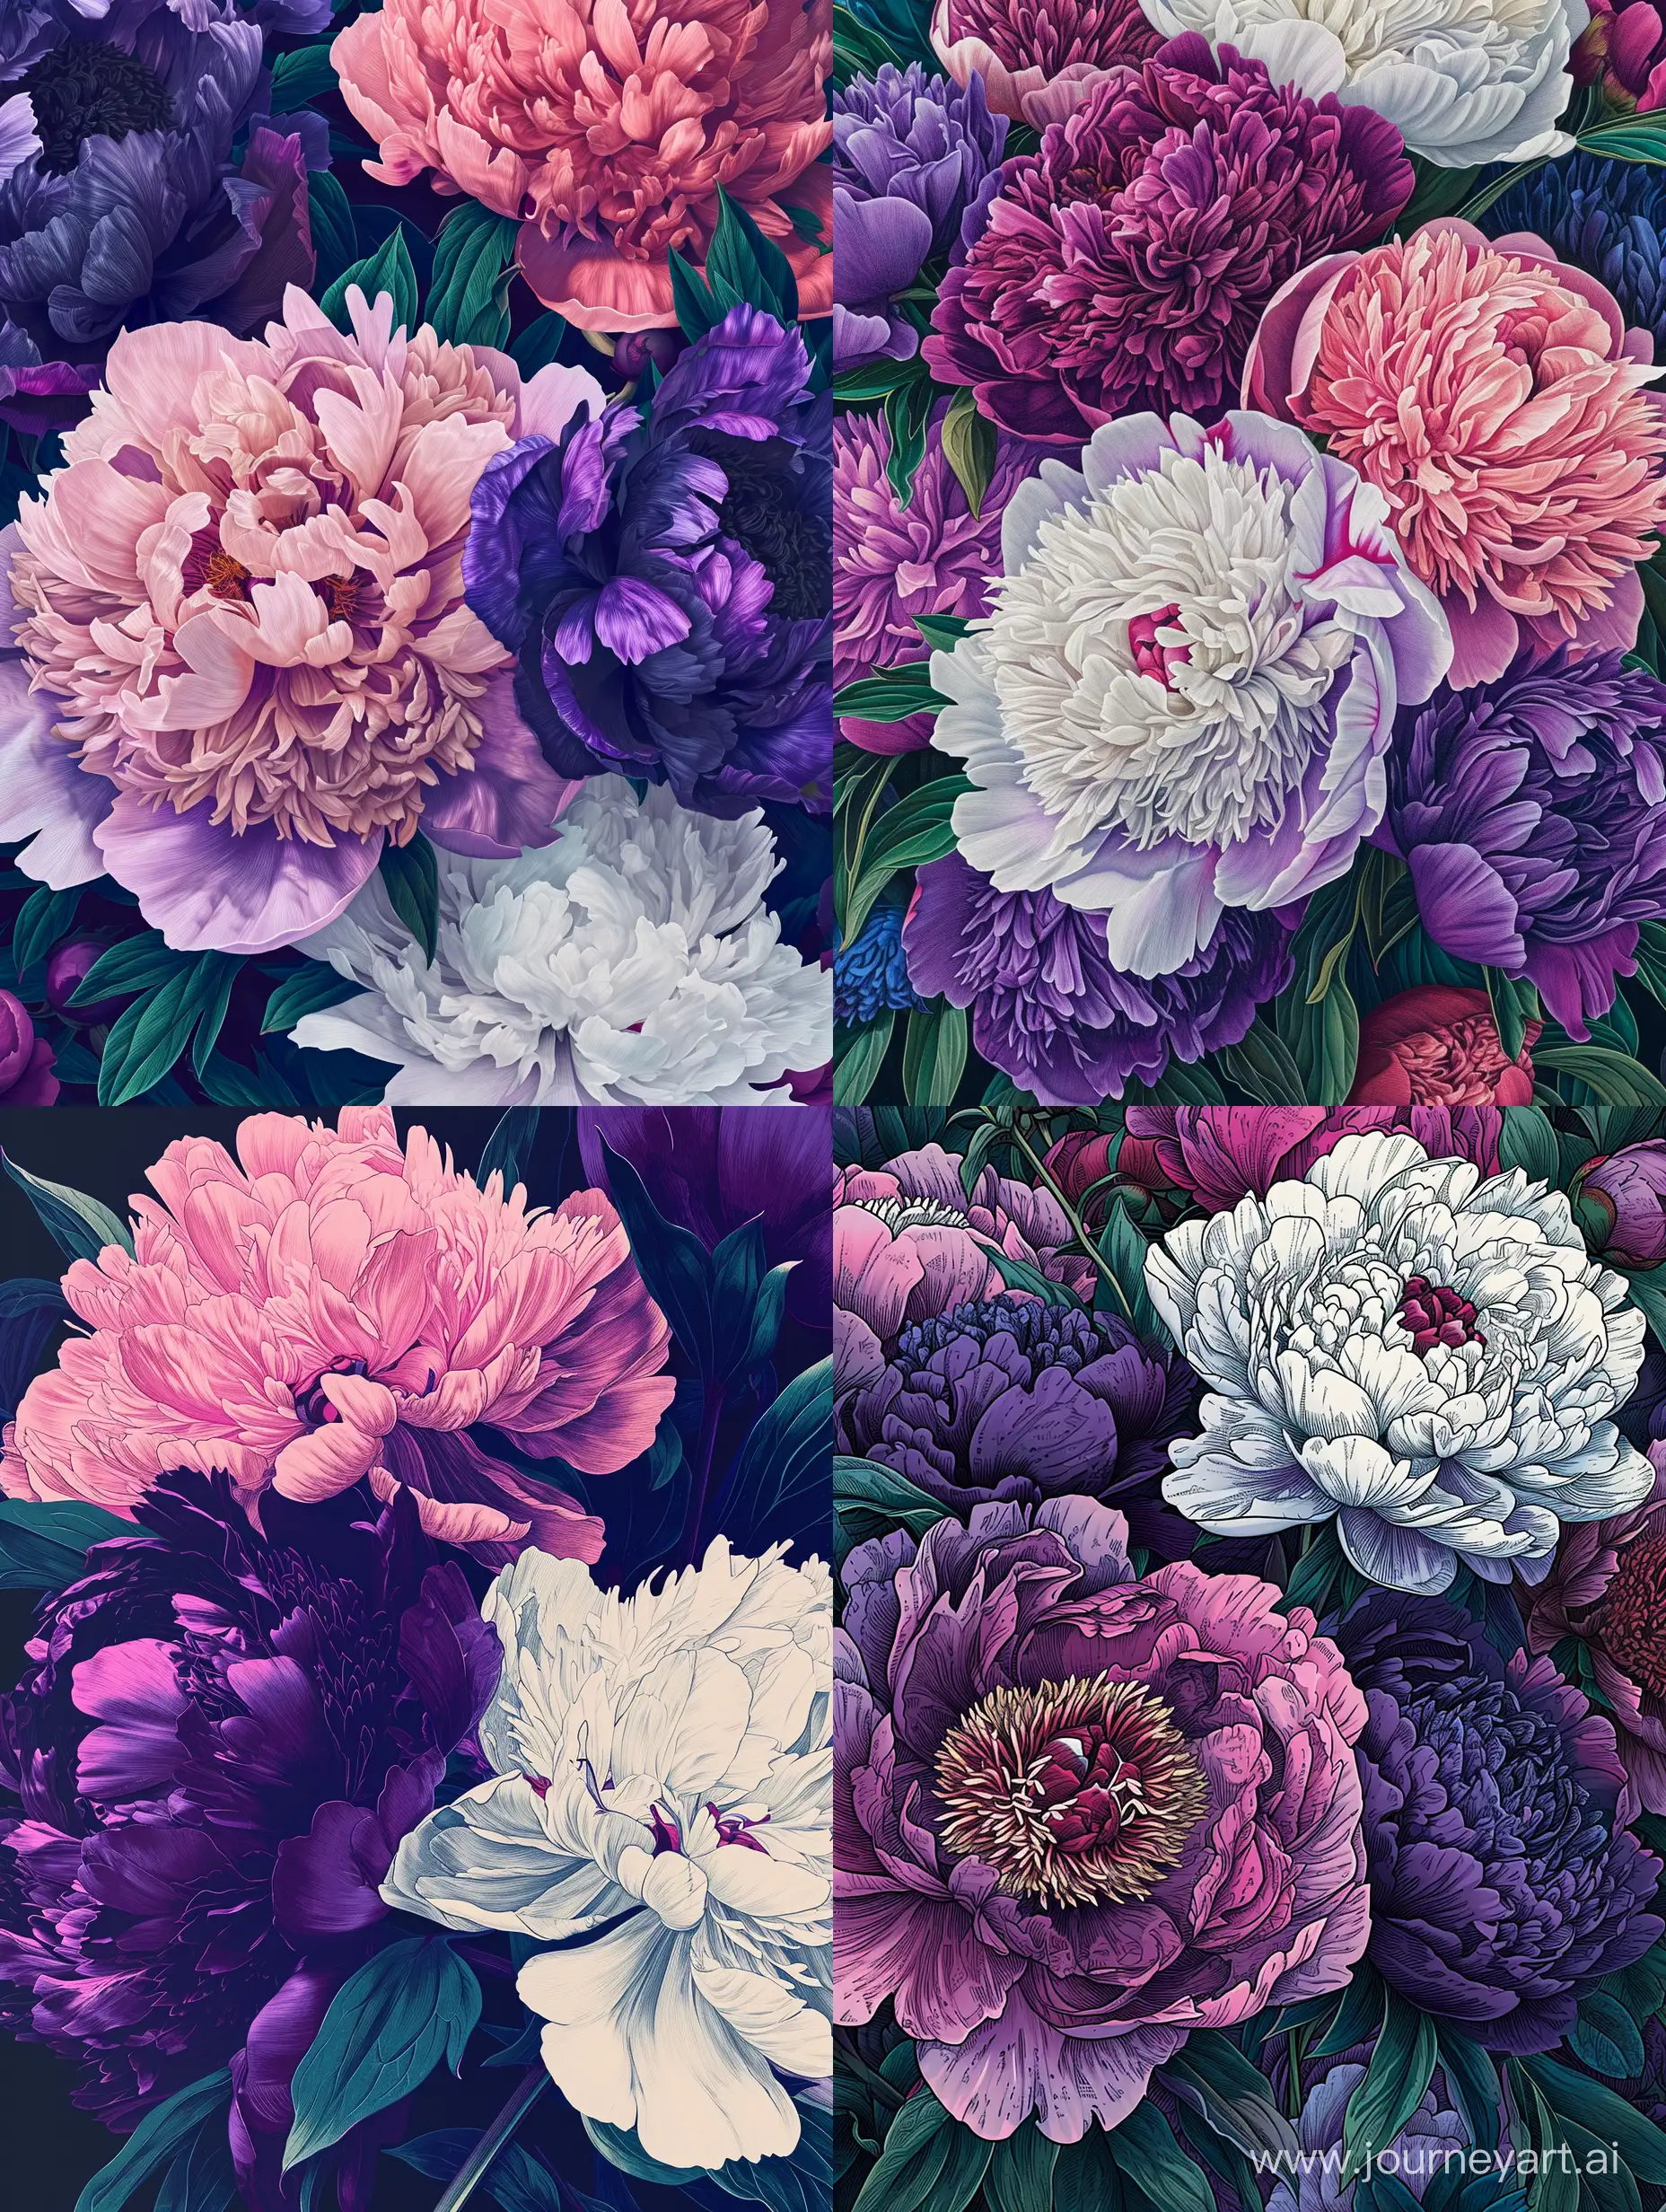 a vibrant and lively Risograph of peonies in full bloom. Highly intricate detailing, texture detail, 8k, The medium should be hyper-realistic drawing, in the style of Leon Bakst.   The lighting should be bright and direct, highlighting the intricate details and vivid colors of the flowers. The colors should be a vibrant palette of purples, pinks, whites, dark blues and greens 